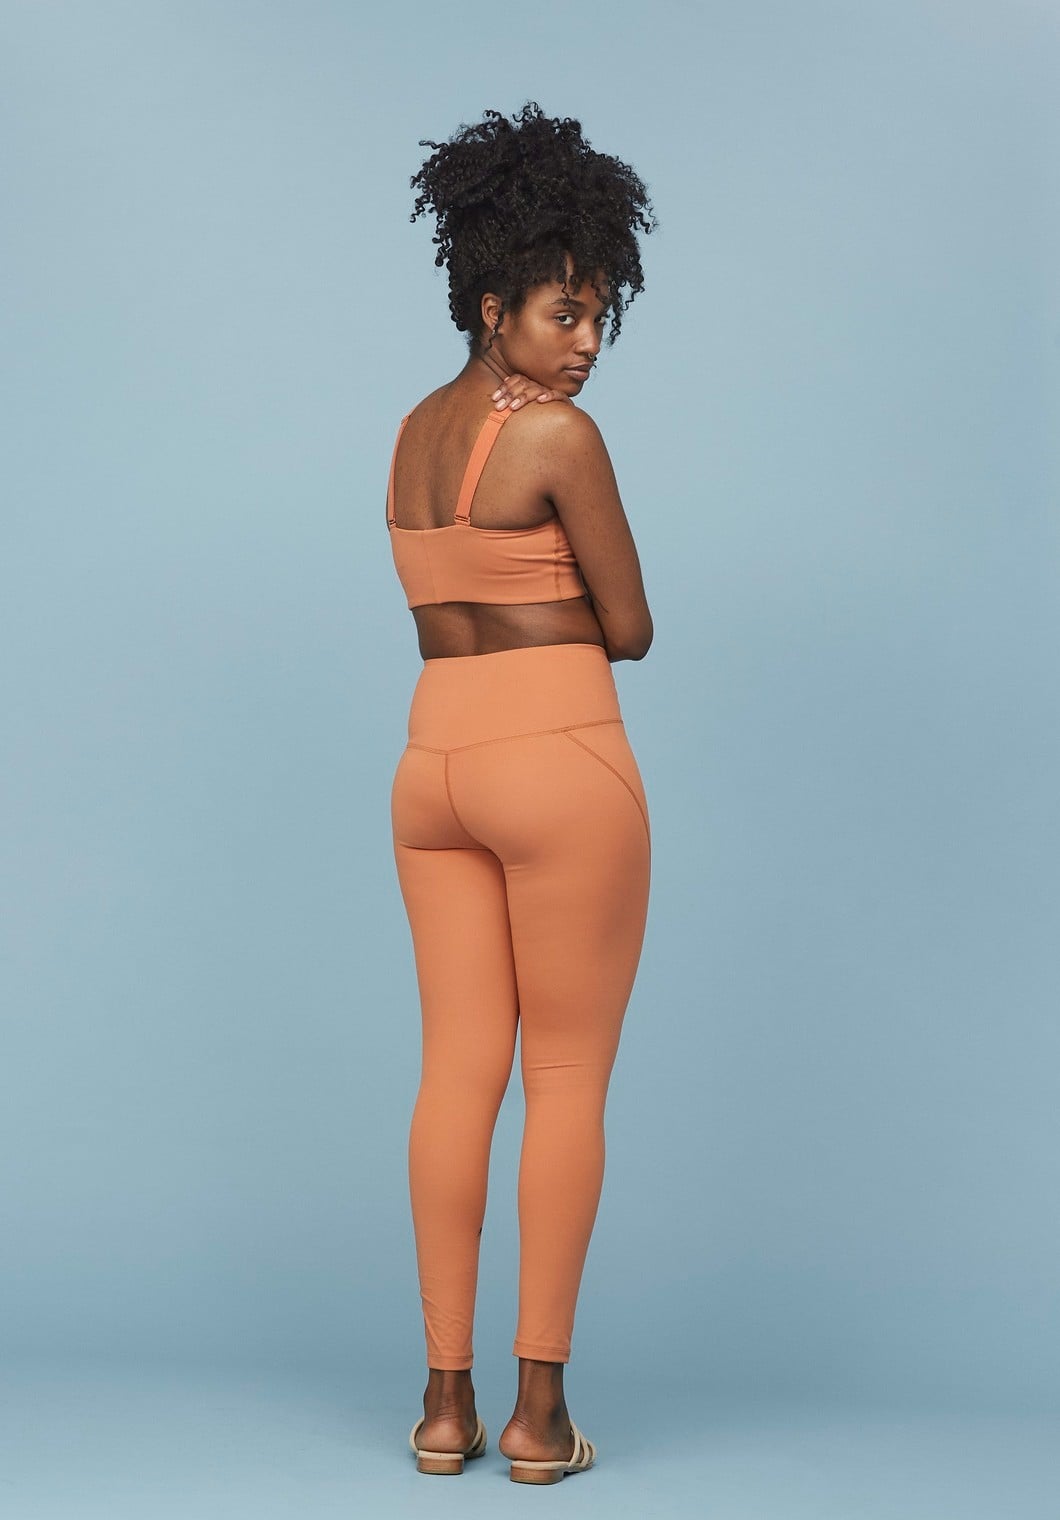 What Are The Best Leggings For Thick Girls? 